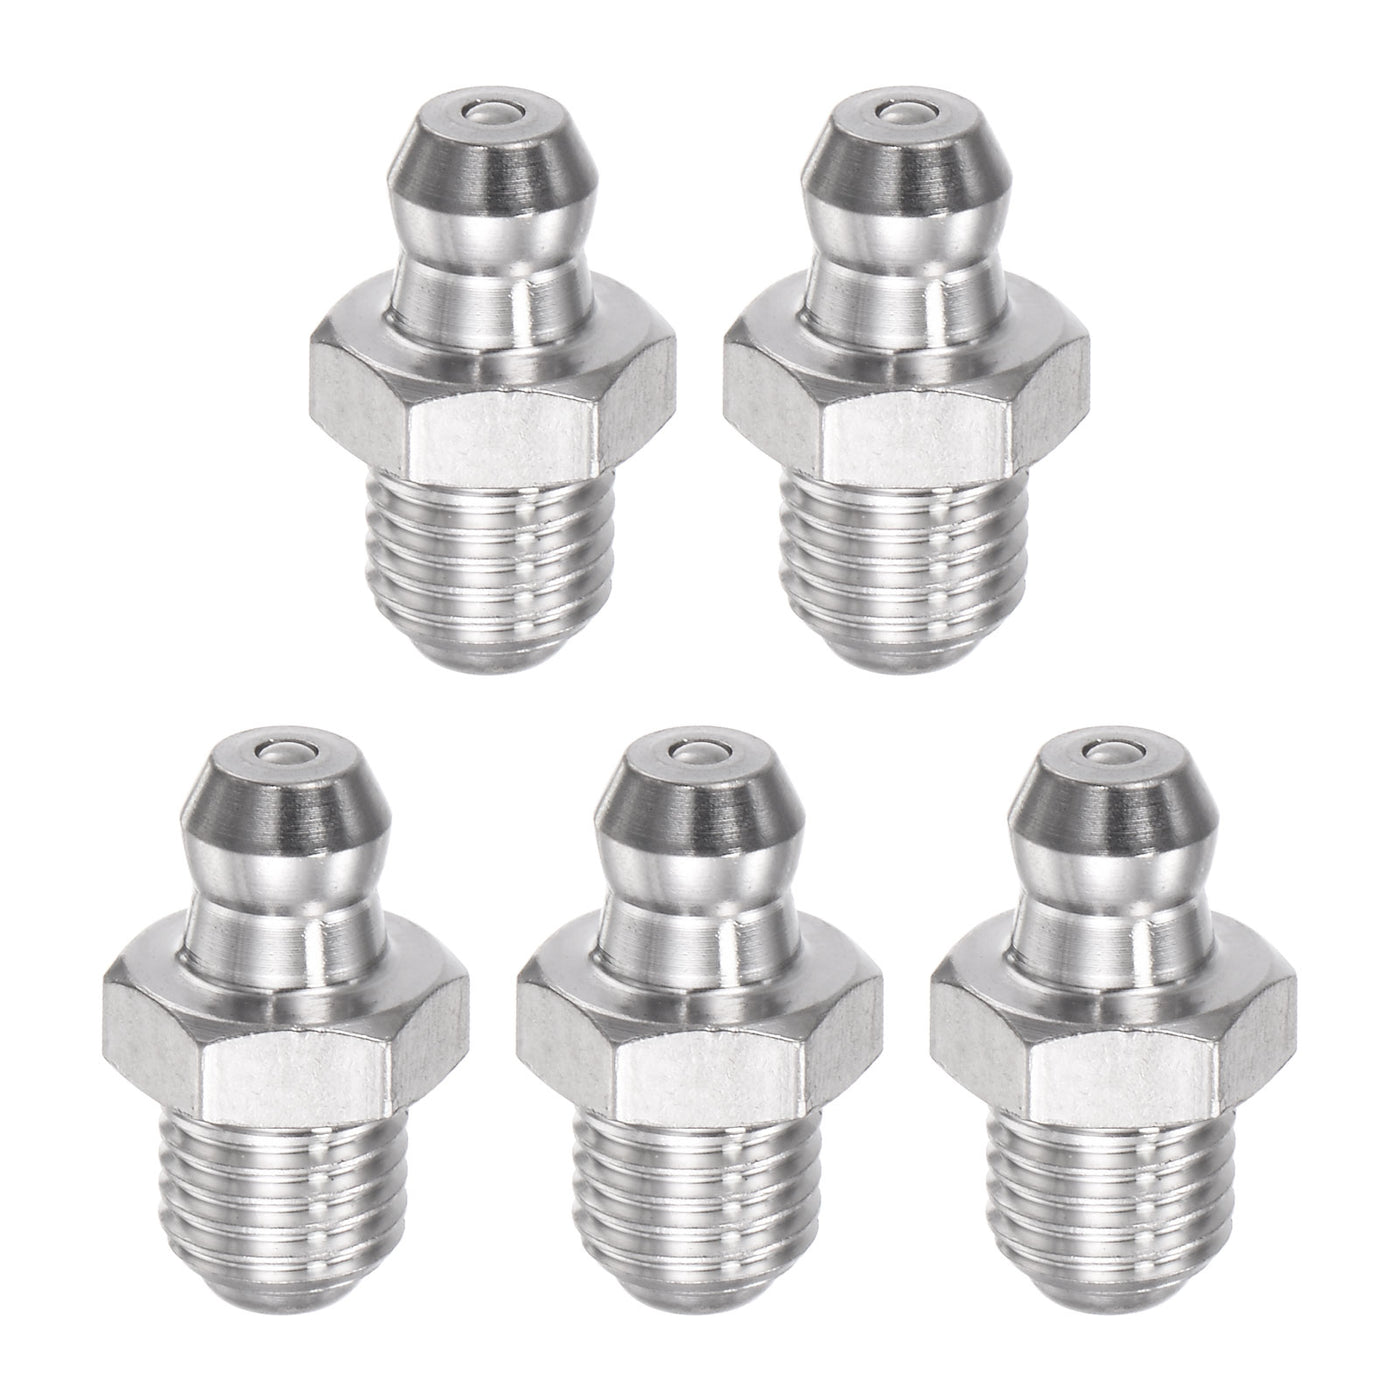 Uxcell Uxcell 304 Stainless Steel Straight Hydraulic Grease Fitting M8 x 1mm Thread, 5Pcs